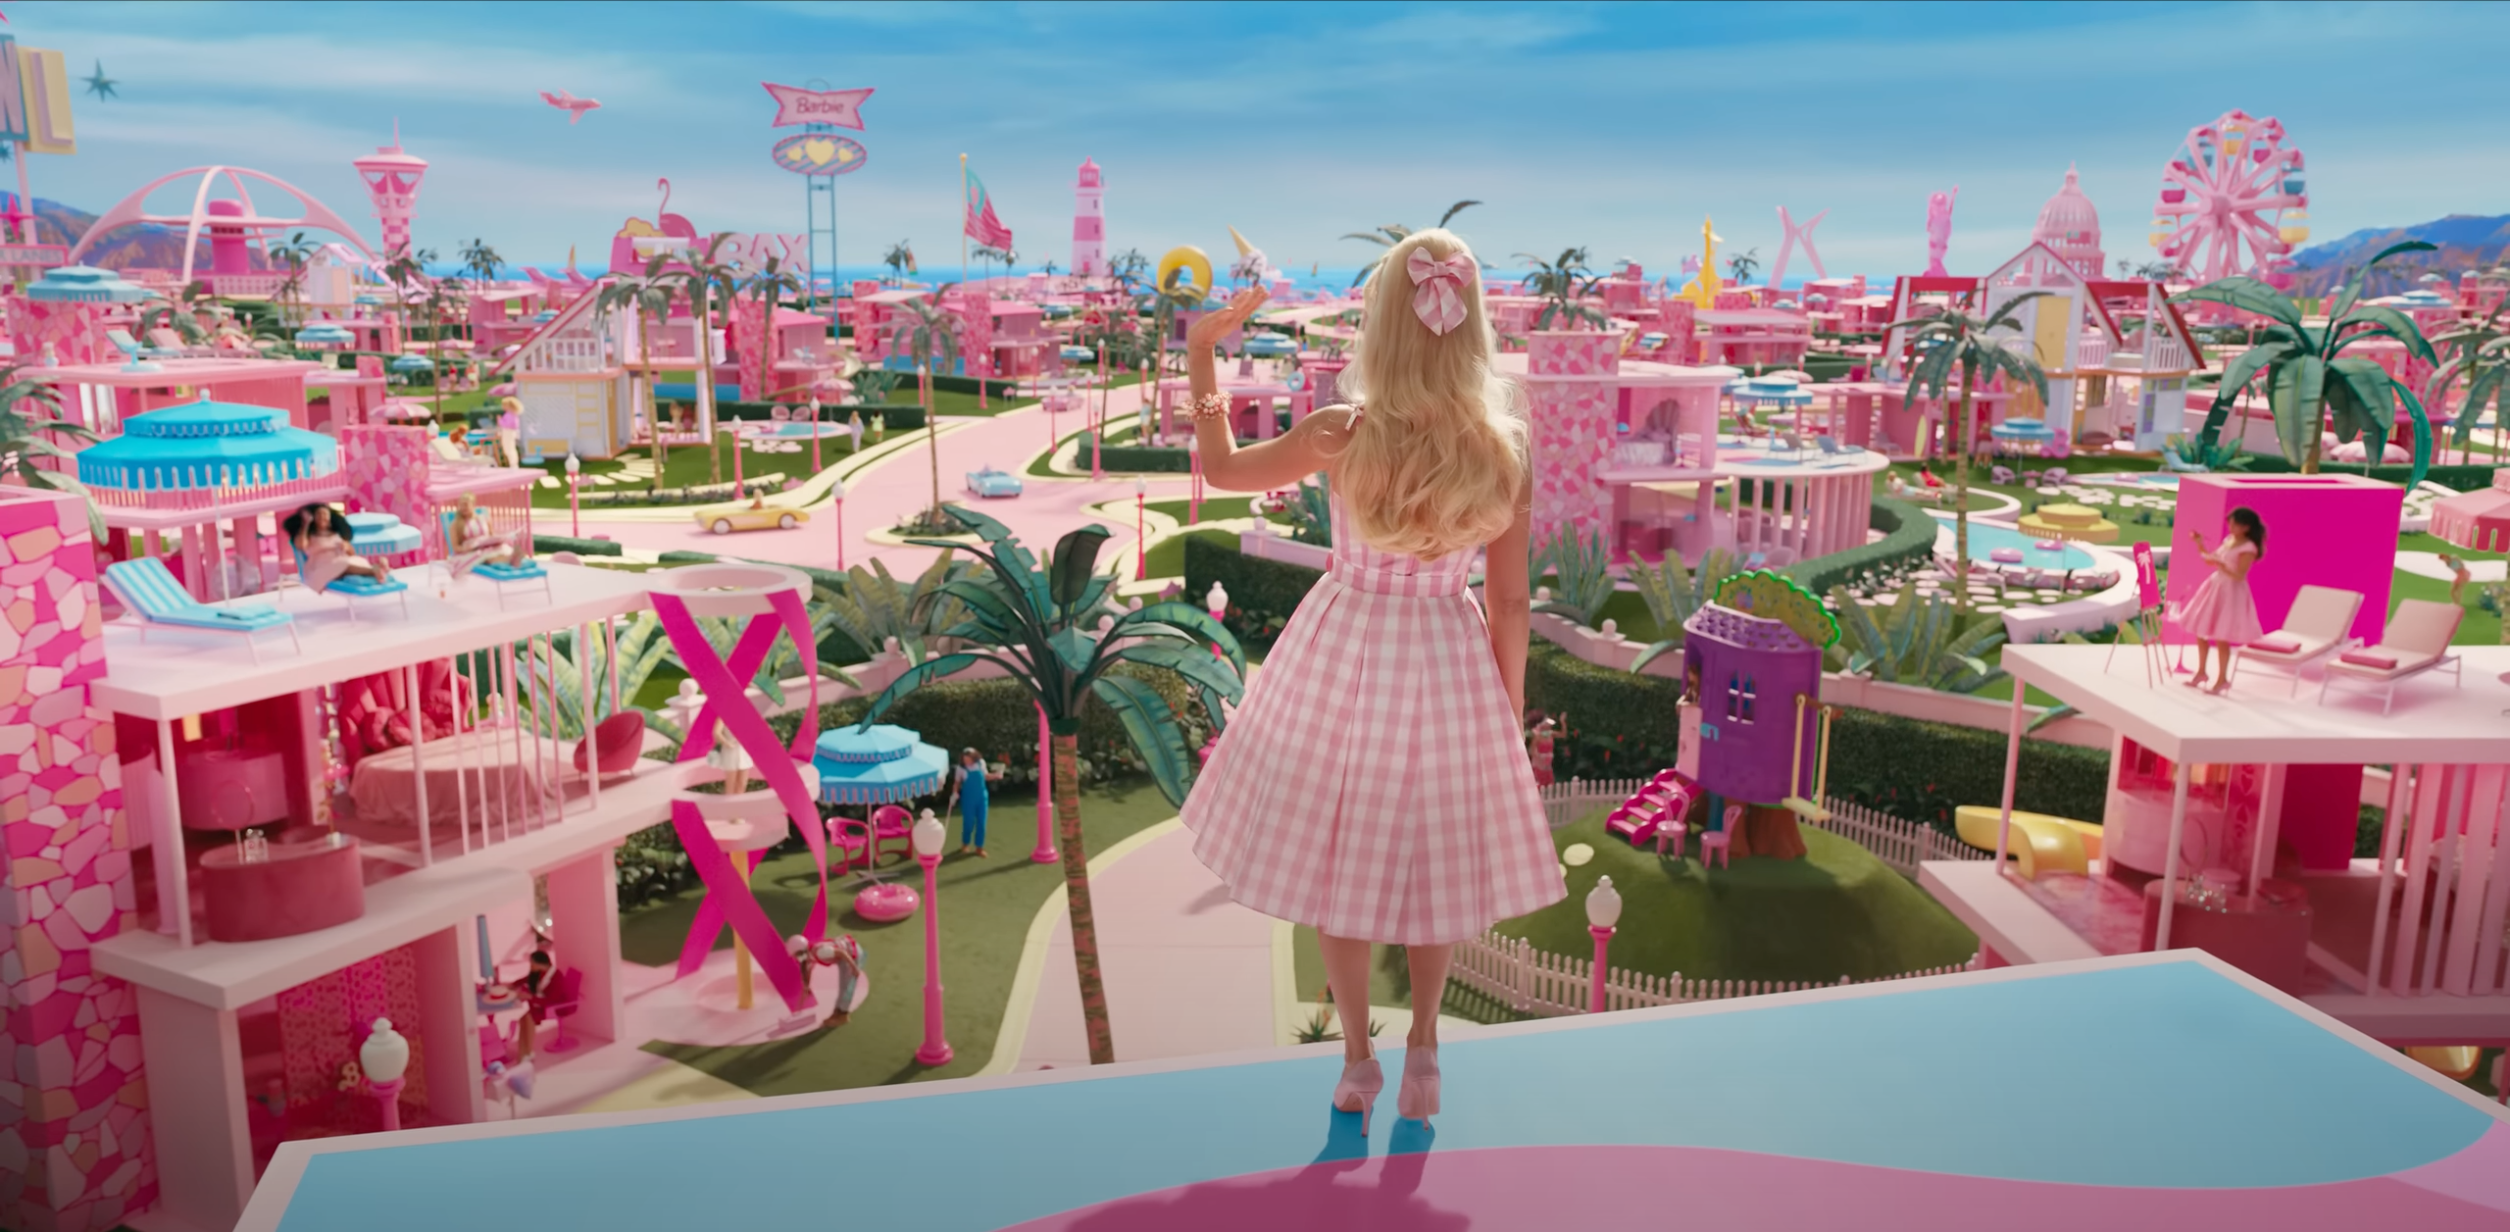 Barbie Standing in her Barbie House infront of Barbie Land